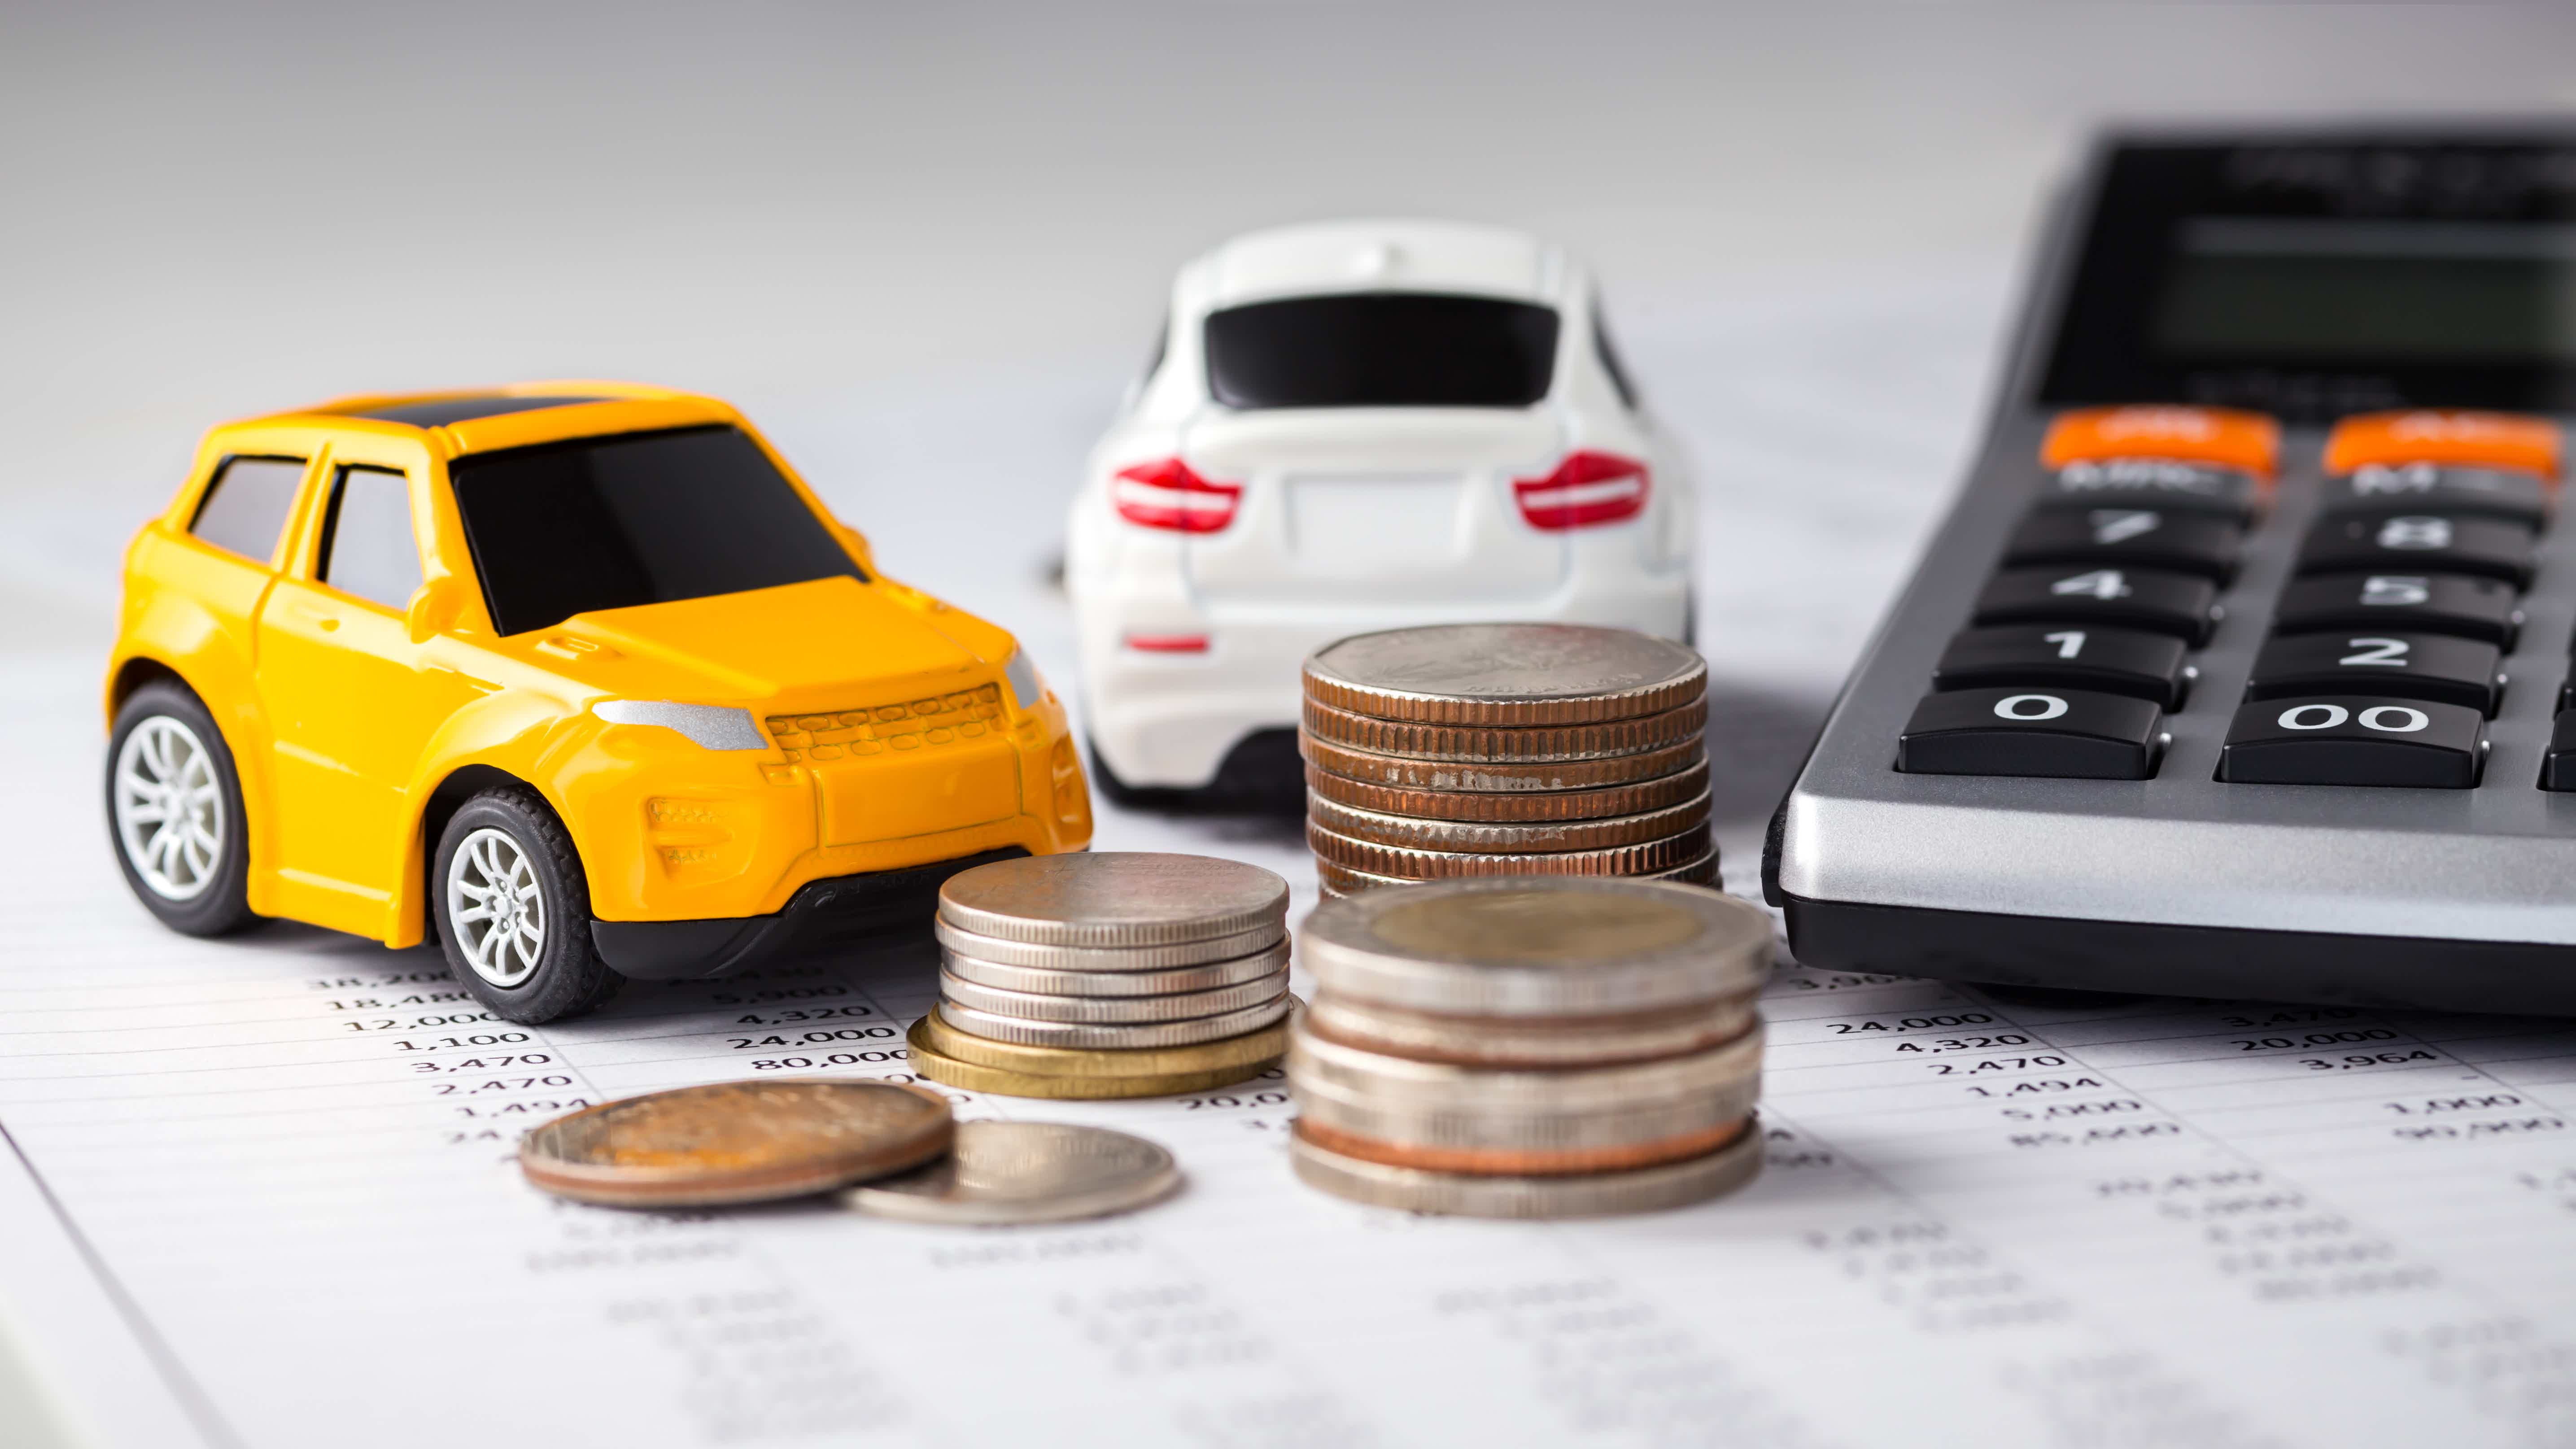 Read our post to know if paying car insurance can help build your credit score! Source: Adobe Stock